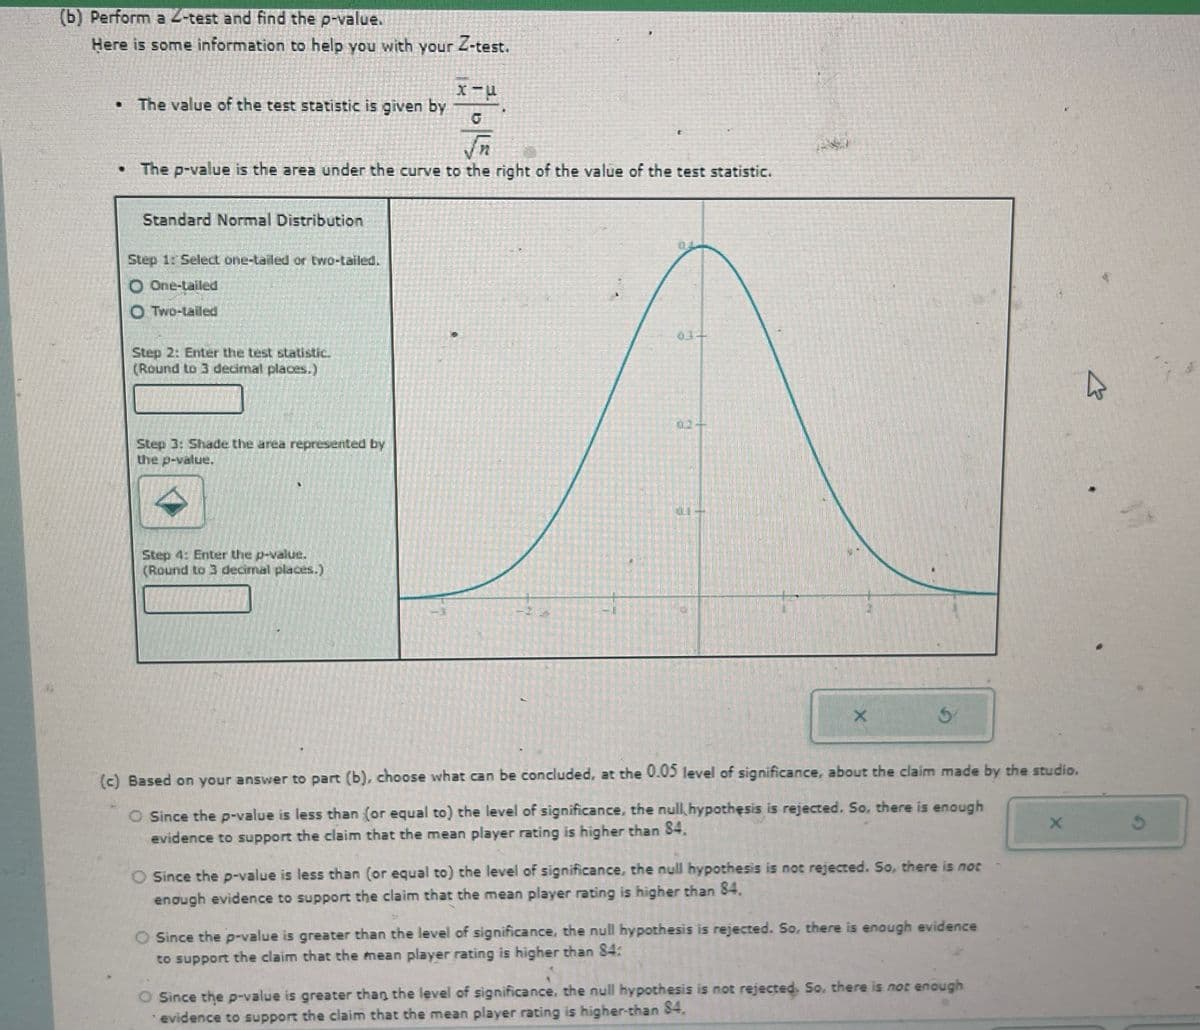 (b) Perform a 2-test and find the p-value.
Here is some information to help you with your Z-test.
. The value of the test statistic is given by
χαμ
√n
• The p-value is the area under the curve to the right of the value of the test statistic.
Standard Normal Distribution
Step 1: Select one-tailed or two-tailed.
One-tailed
O Two-tailed
Step 2: Enter the test statistic.
(Round to 3 decimal places.)
01-
02-
Step 3: Shade the area represented by
the p-value.
Step 4: Enter the p-value.
(Round to 3 decimal places.)
X
(c) Based on your answer to part (b), choose what can be concluded, at the 0.05 level of significance, about the claim made by the studio.
O Since the p-value is less than (or equal to) the level of significance, the null hypothesis is rejected. So, there is enough
evidence to support the claim that the mean player rating is higher than 84.
O Since the p-value is less than (or equal to) the level of significance, the null hypothesis is not rejected. So, there is not
enough evidence to support the claim that the mean player rating is higher than 84.
O Since the p-value is greater than the level of significance, the null hypothesis is rejected. So, there is enough evidence
to support the claim that the mean player rating is higher than 84:
O Since the p-value is greater than the level of significance, the null hypothesis is not rejected. So, there is not enough
evidence to support the claim that the mean player rating is higher-than $4.
X